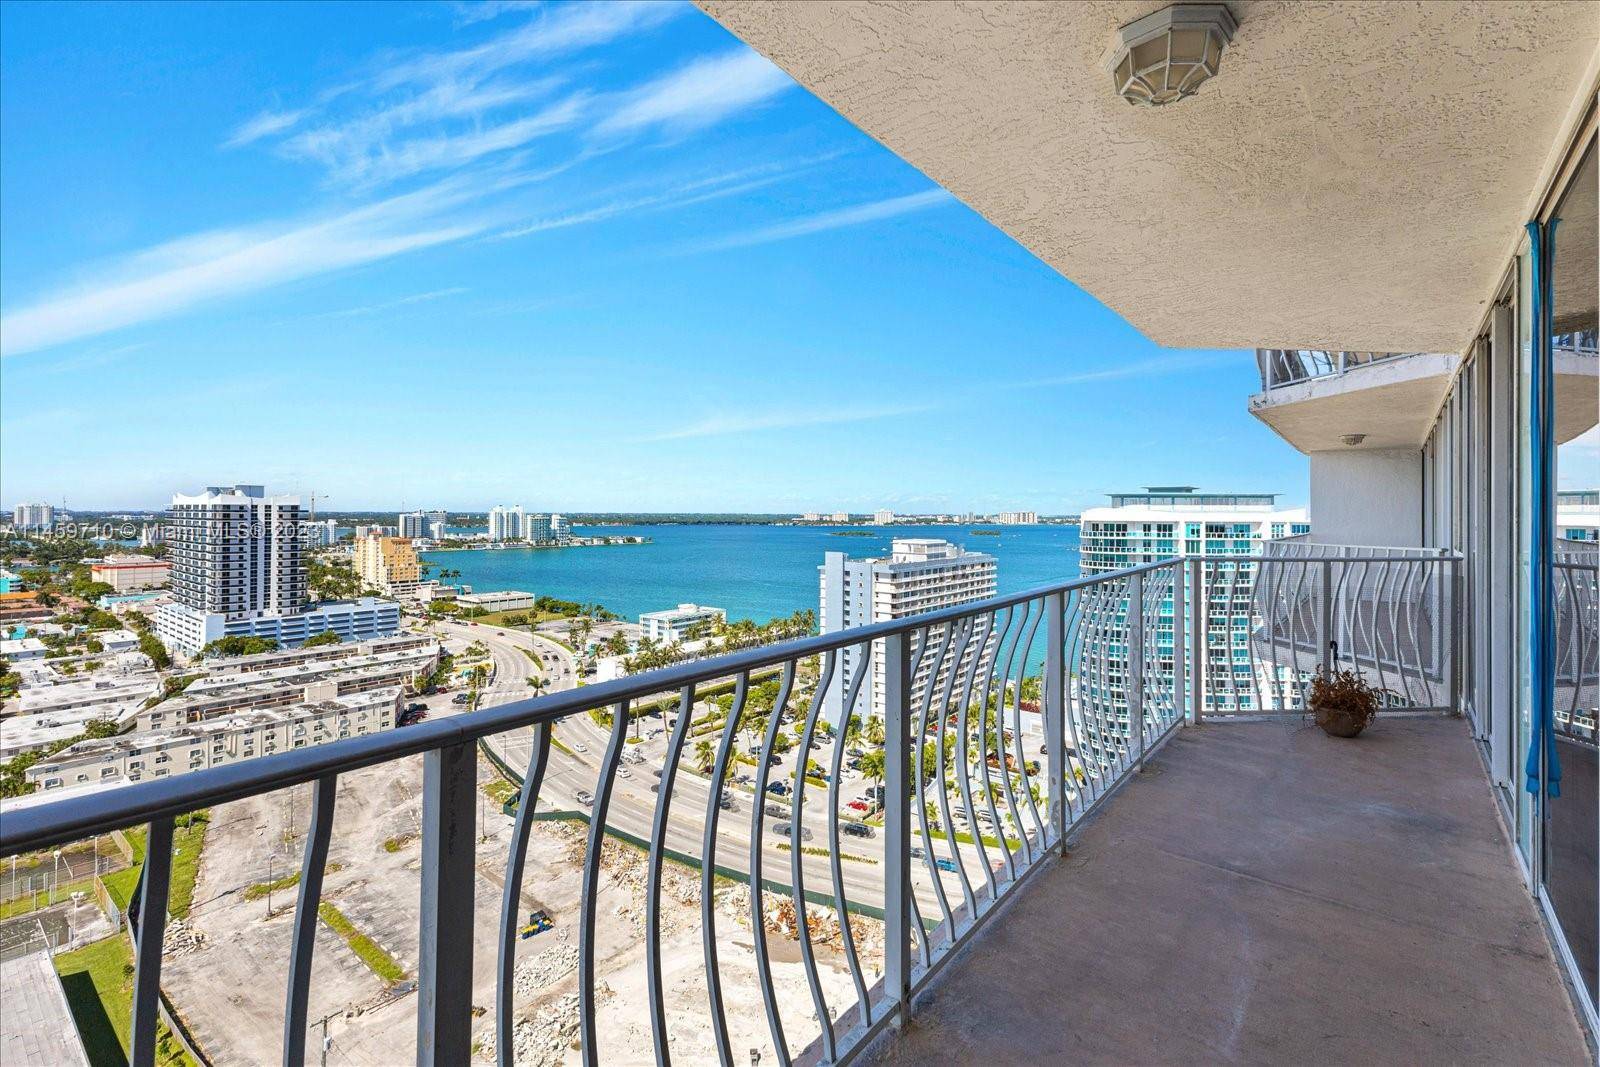 West facing bay and Miami skyline views with unforgettable sunsets.